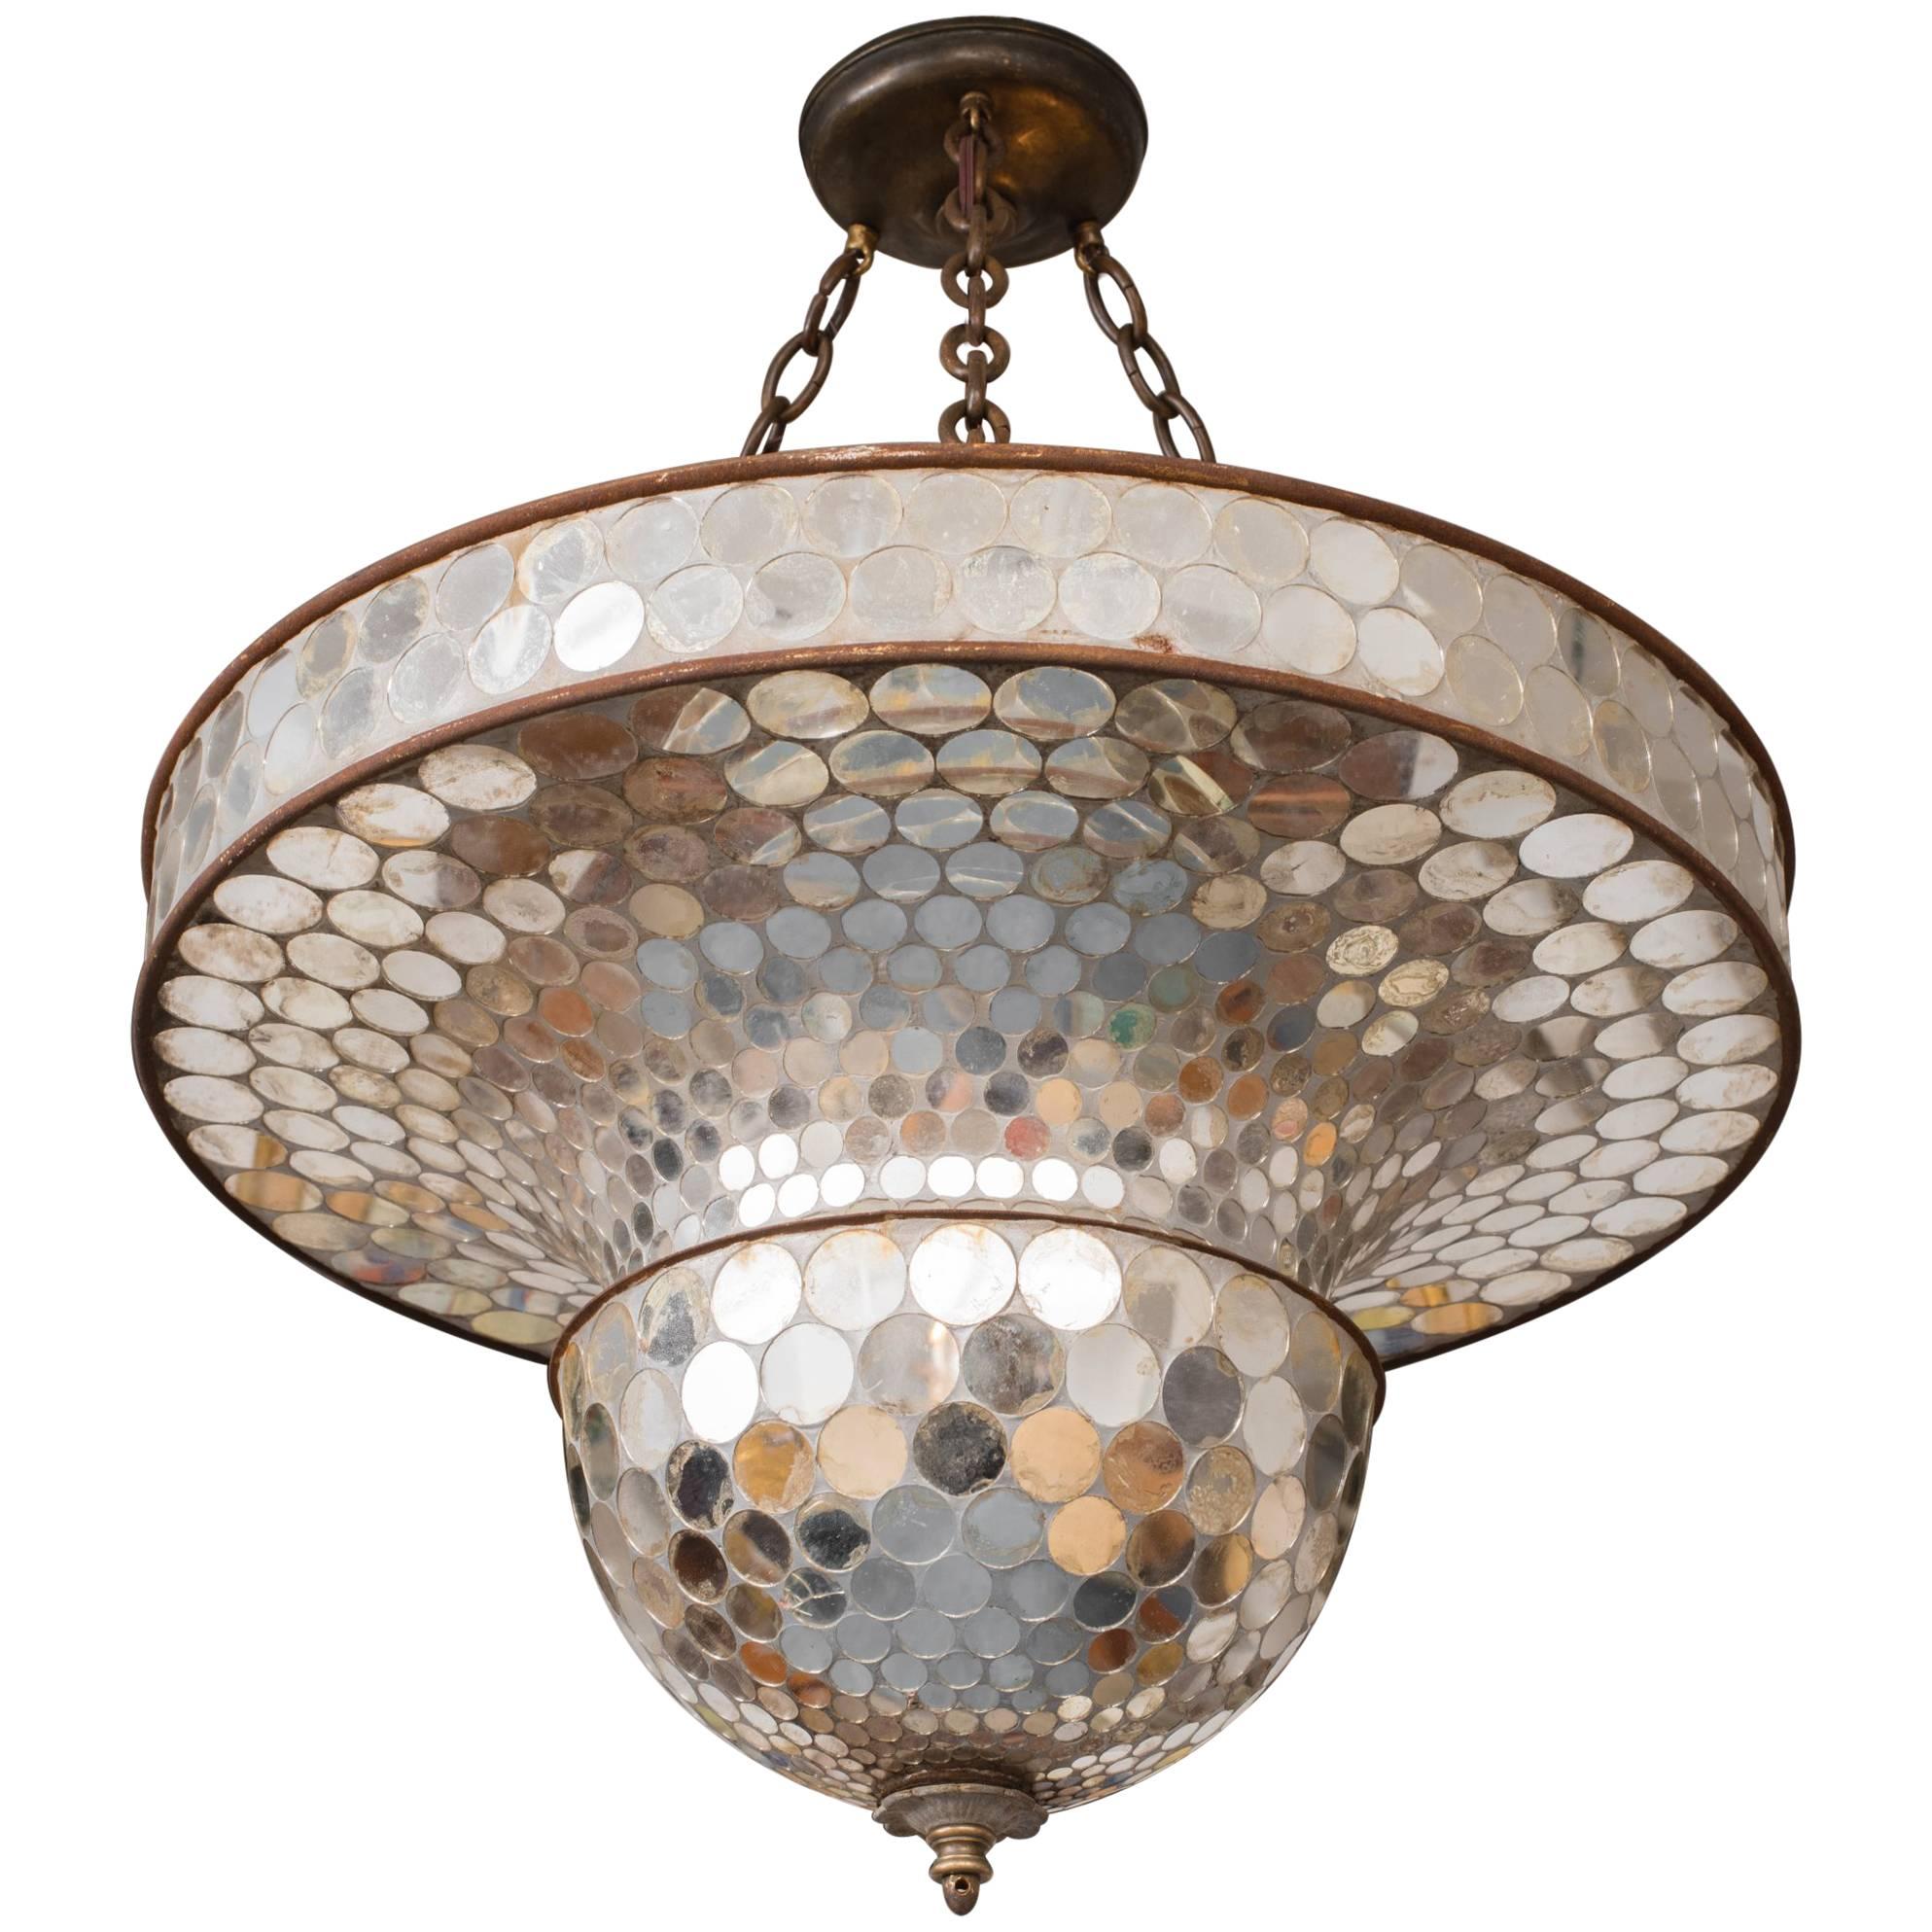 Whimsical Mirrored Mosaic Suspension or Disco Ball